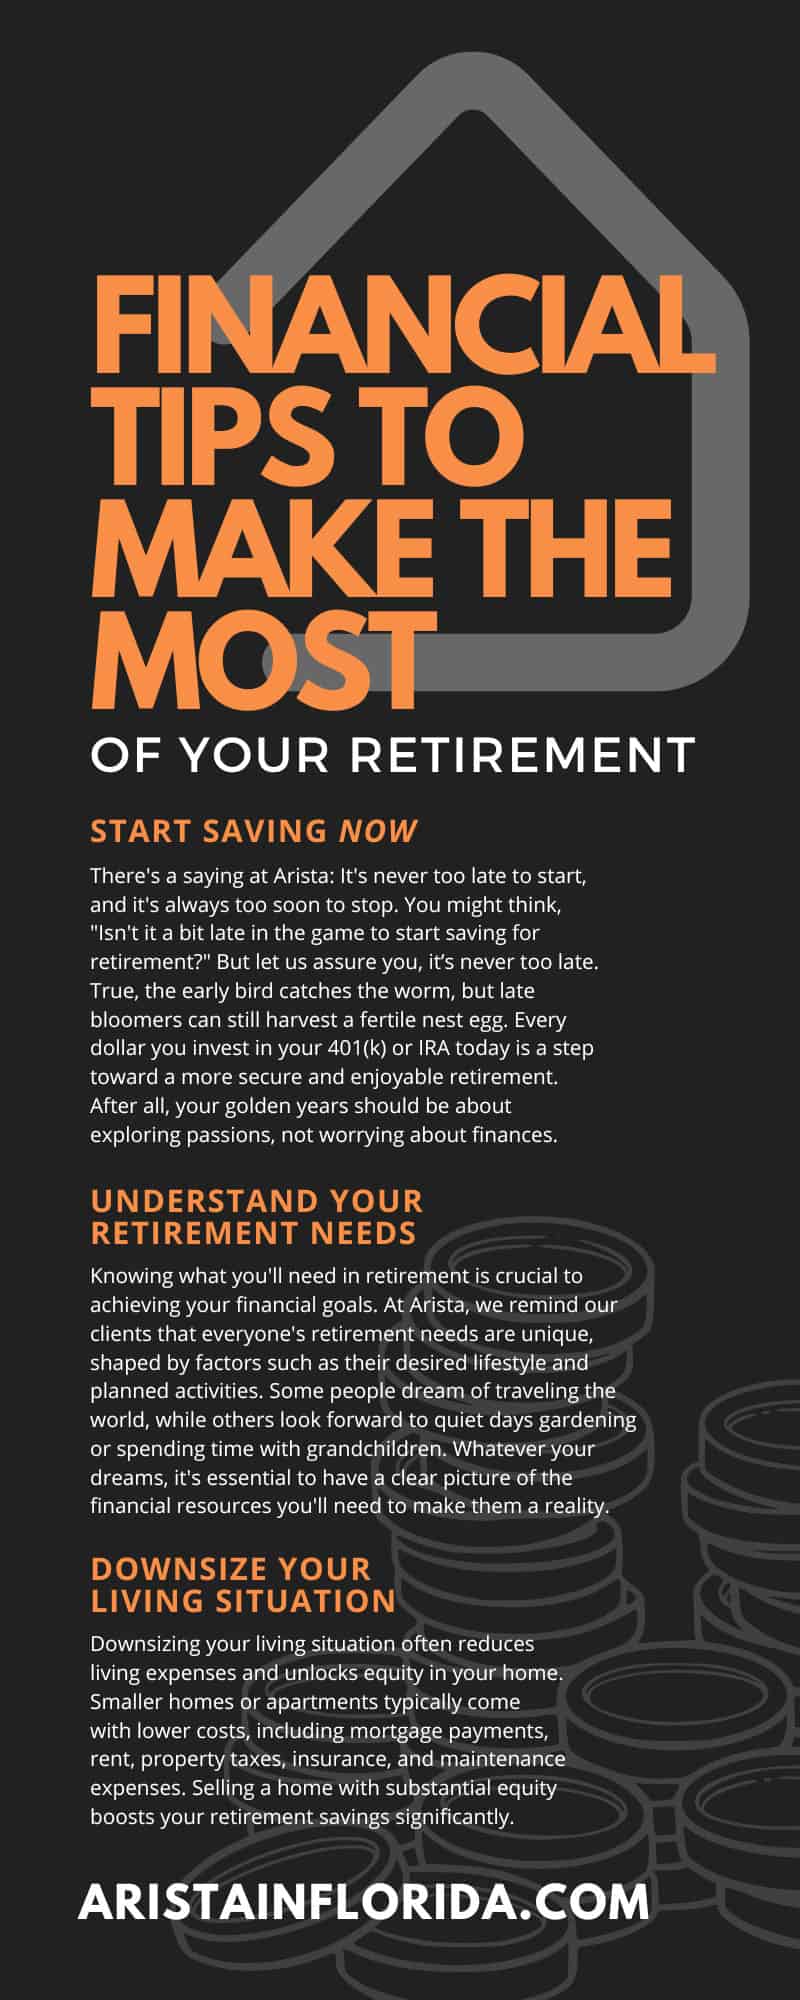 6 Financial Tips To Make the Most of Your Retirement 